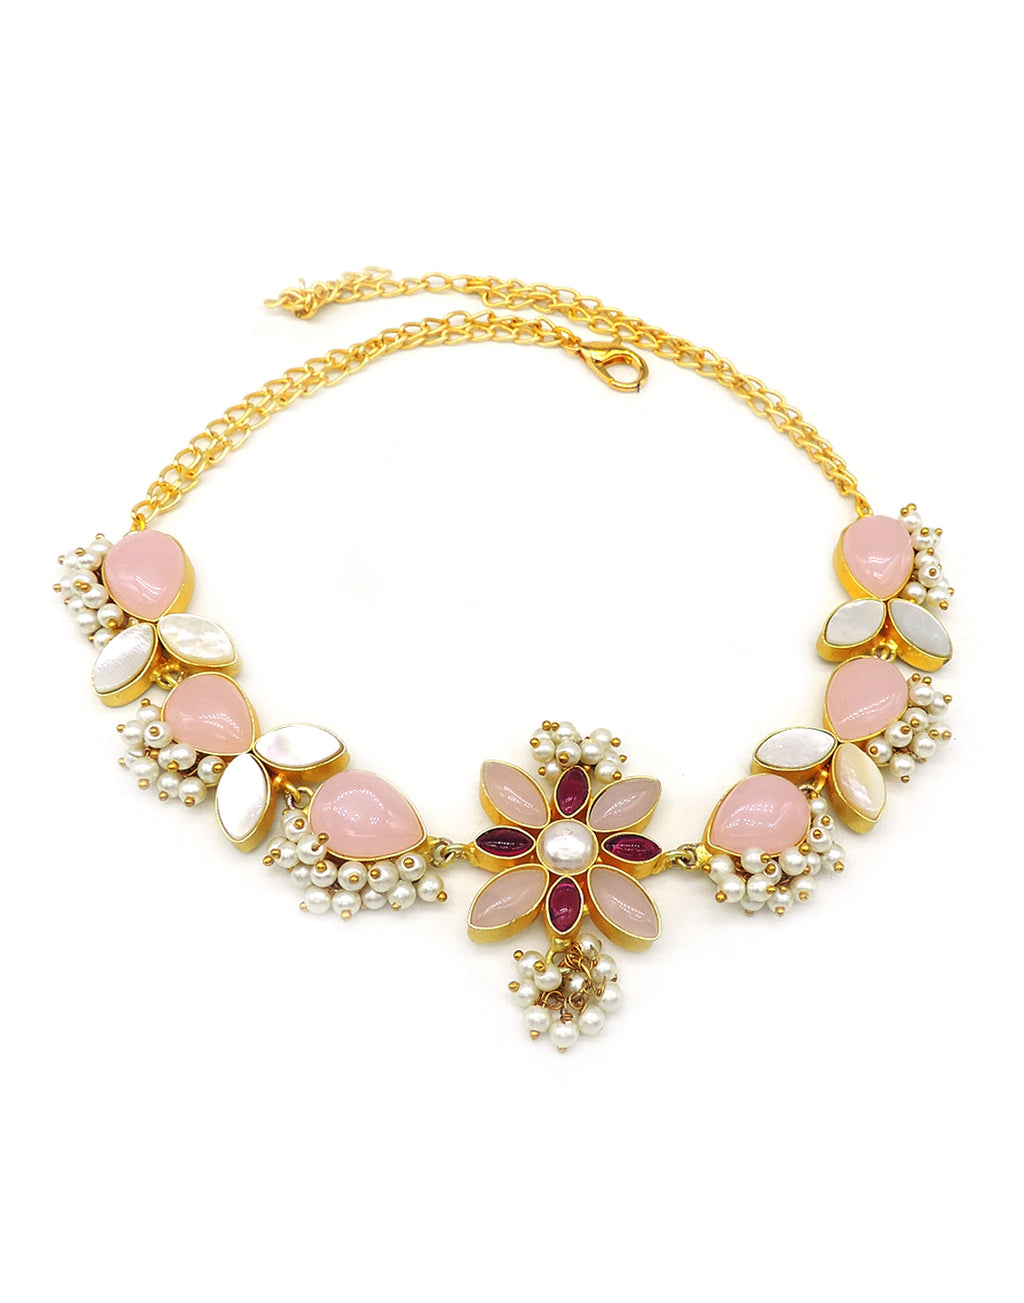 Rose & Red Haathi Necklace - Statement Necklaces - Gold-Plated & Hypoallergenic Jewellery - Made in India - Dubai Jewellery - Dori